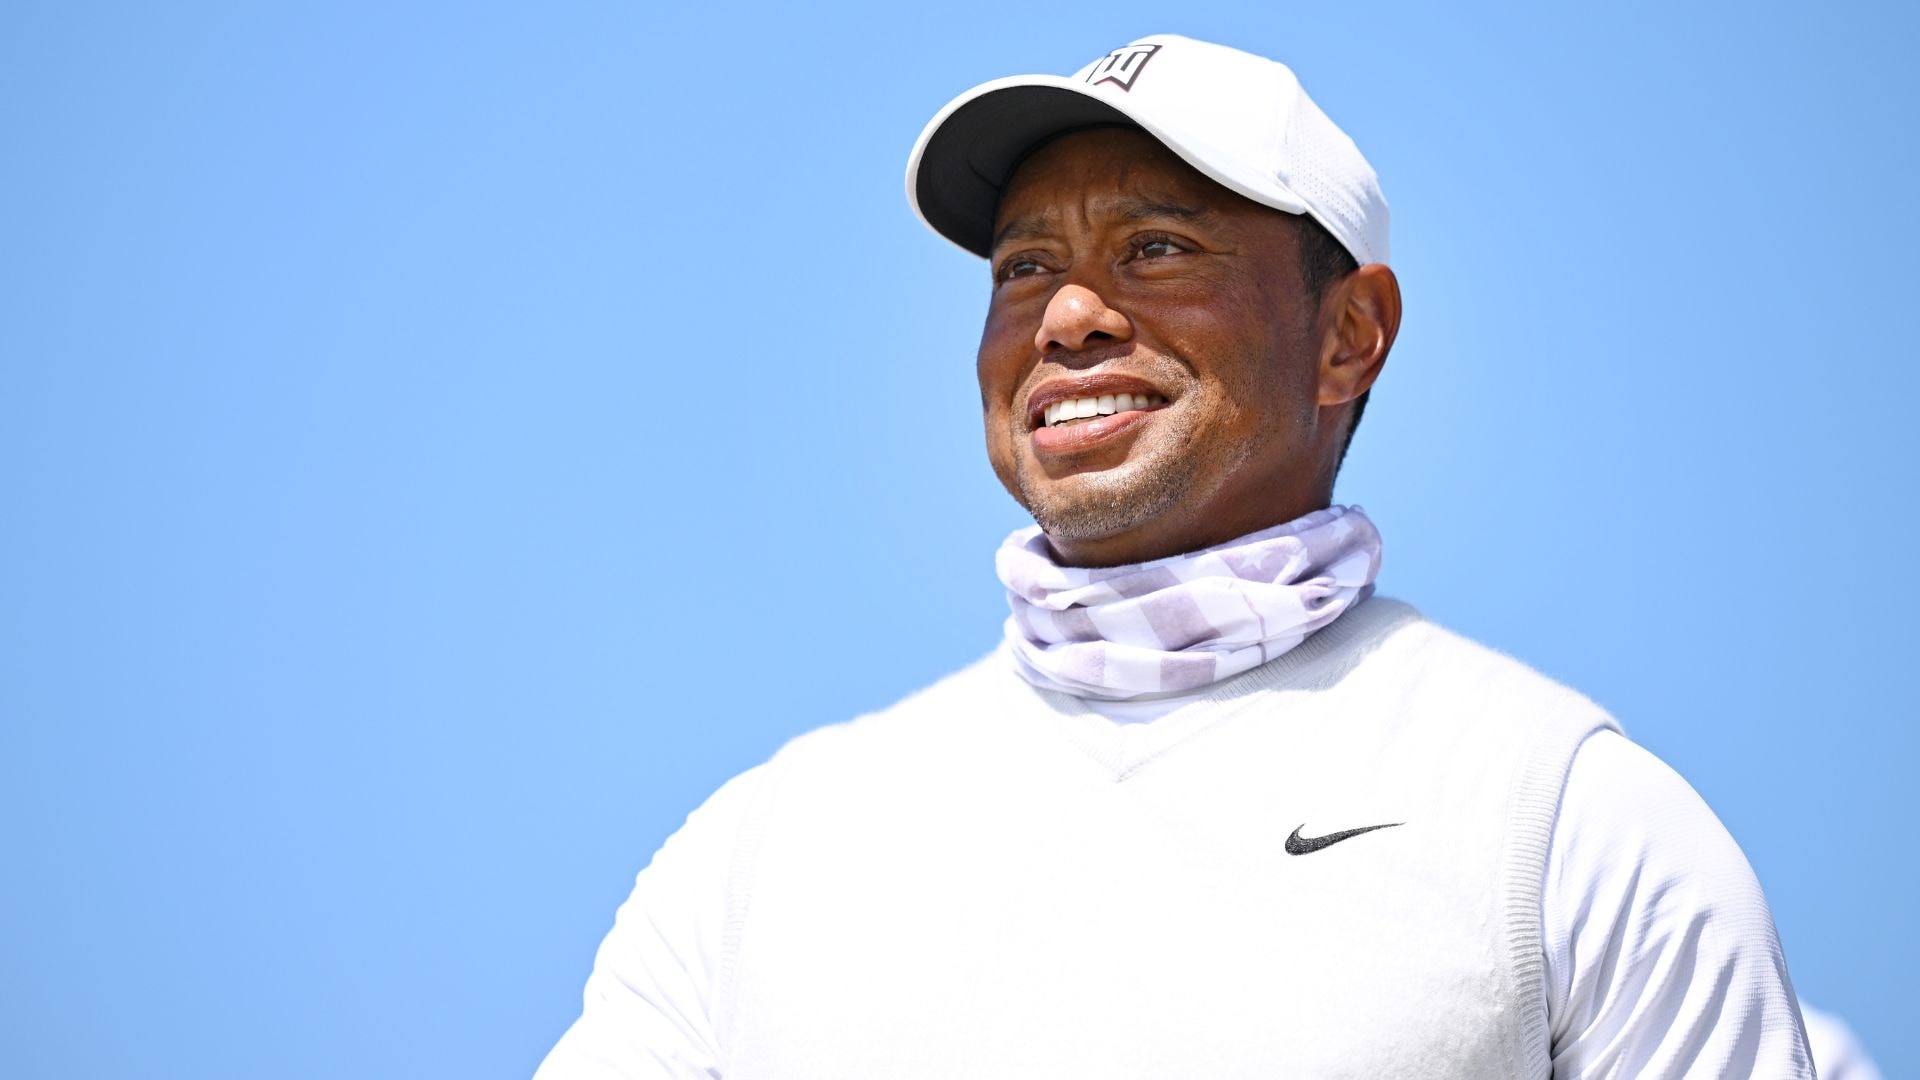 Despite another physical setback, Tiger optimistic about The Match, PNC